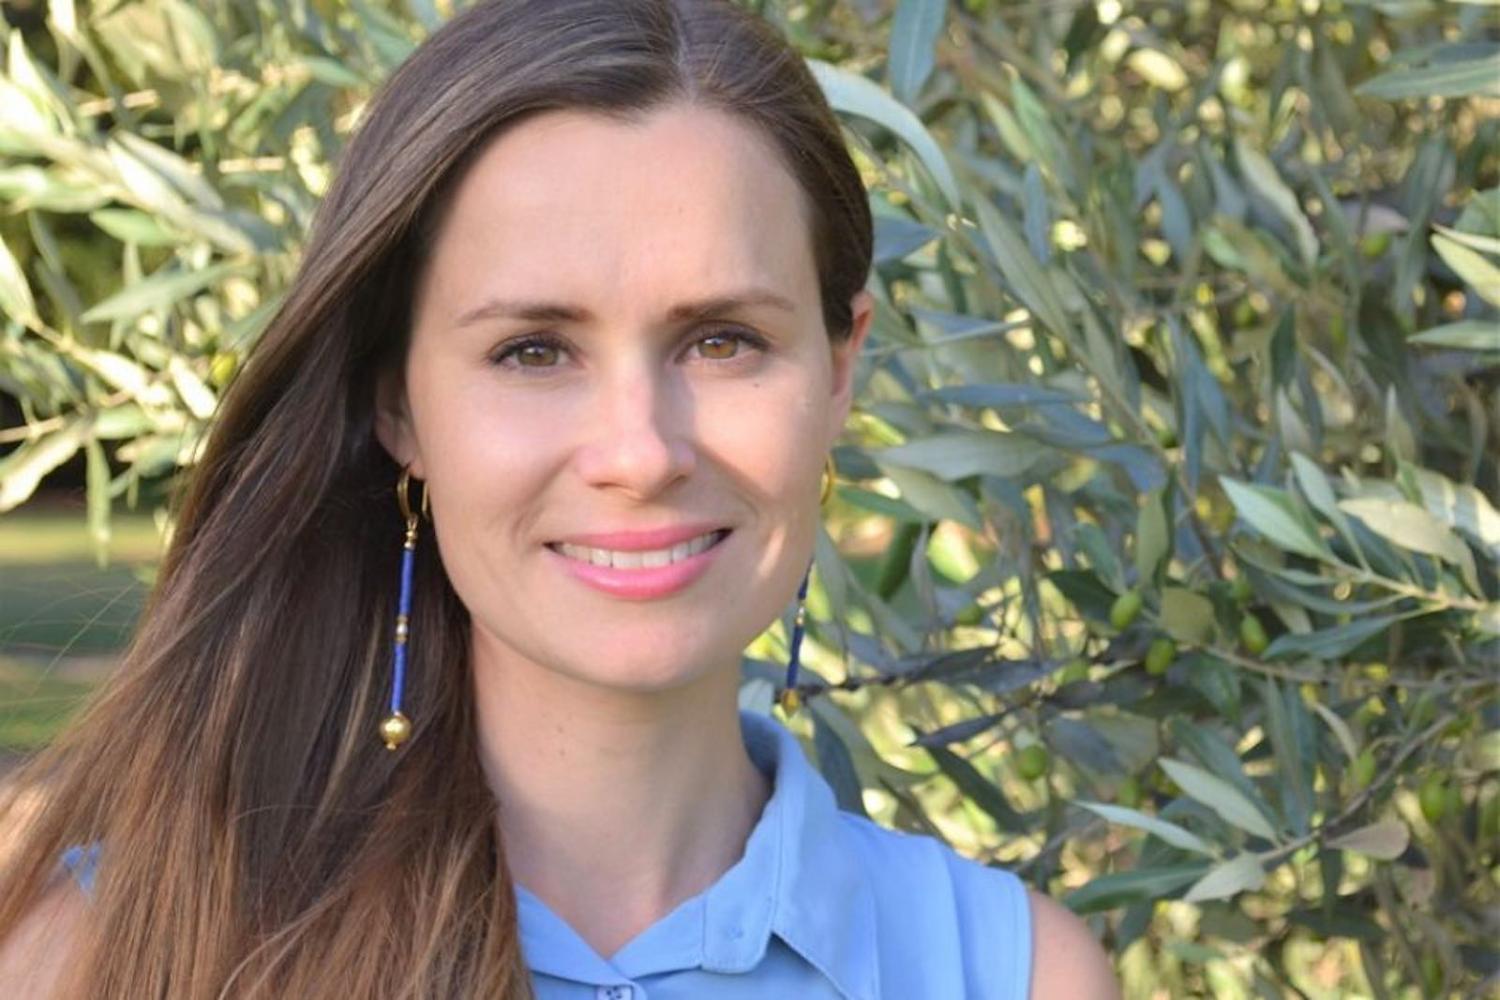 University of Melbourne lecturer Kylie Moore-Gilbert has been accused of espionage in Iran and sentenced to 10 years jail (Photo: University of Melbourne)